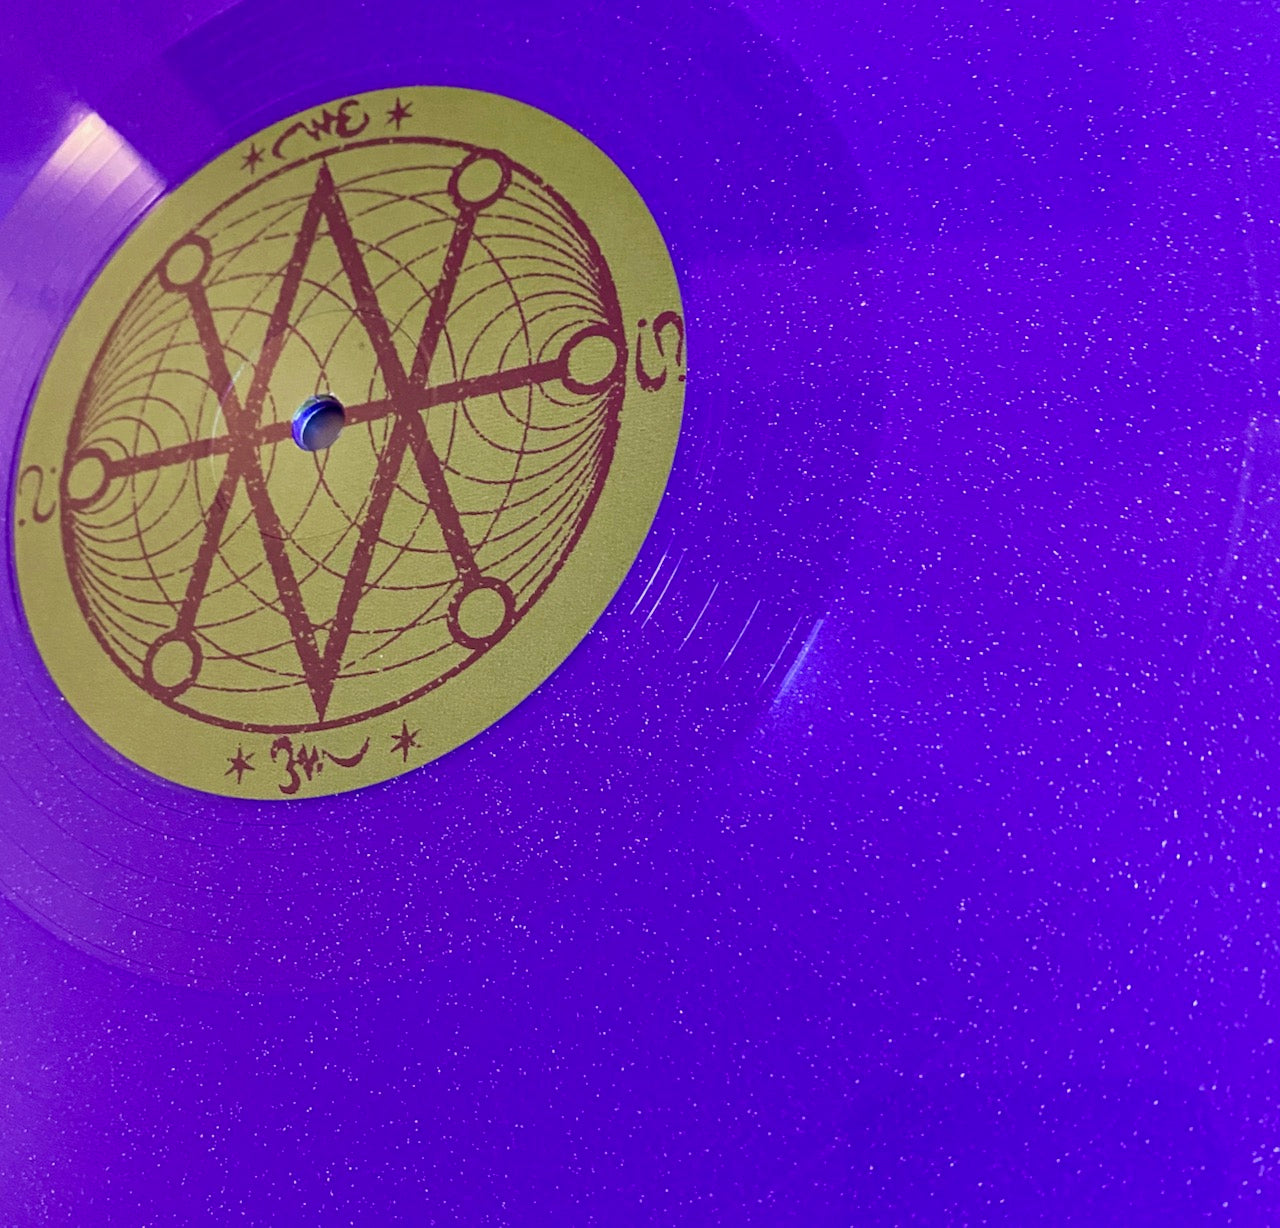 ELECTRIC WIZARD WE LIVE (PURPLE GLITTER) LP – Lunchbox Records